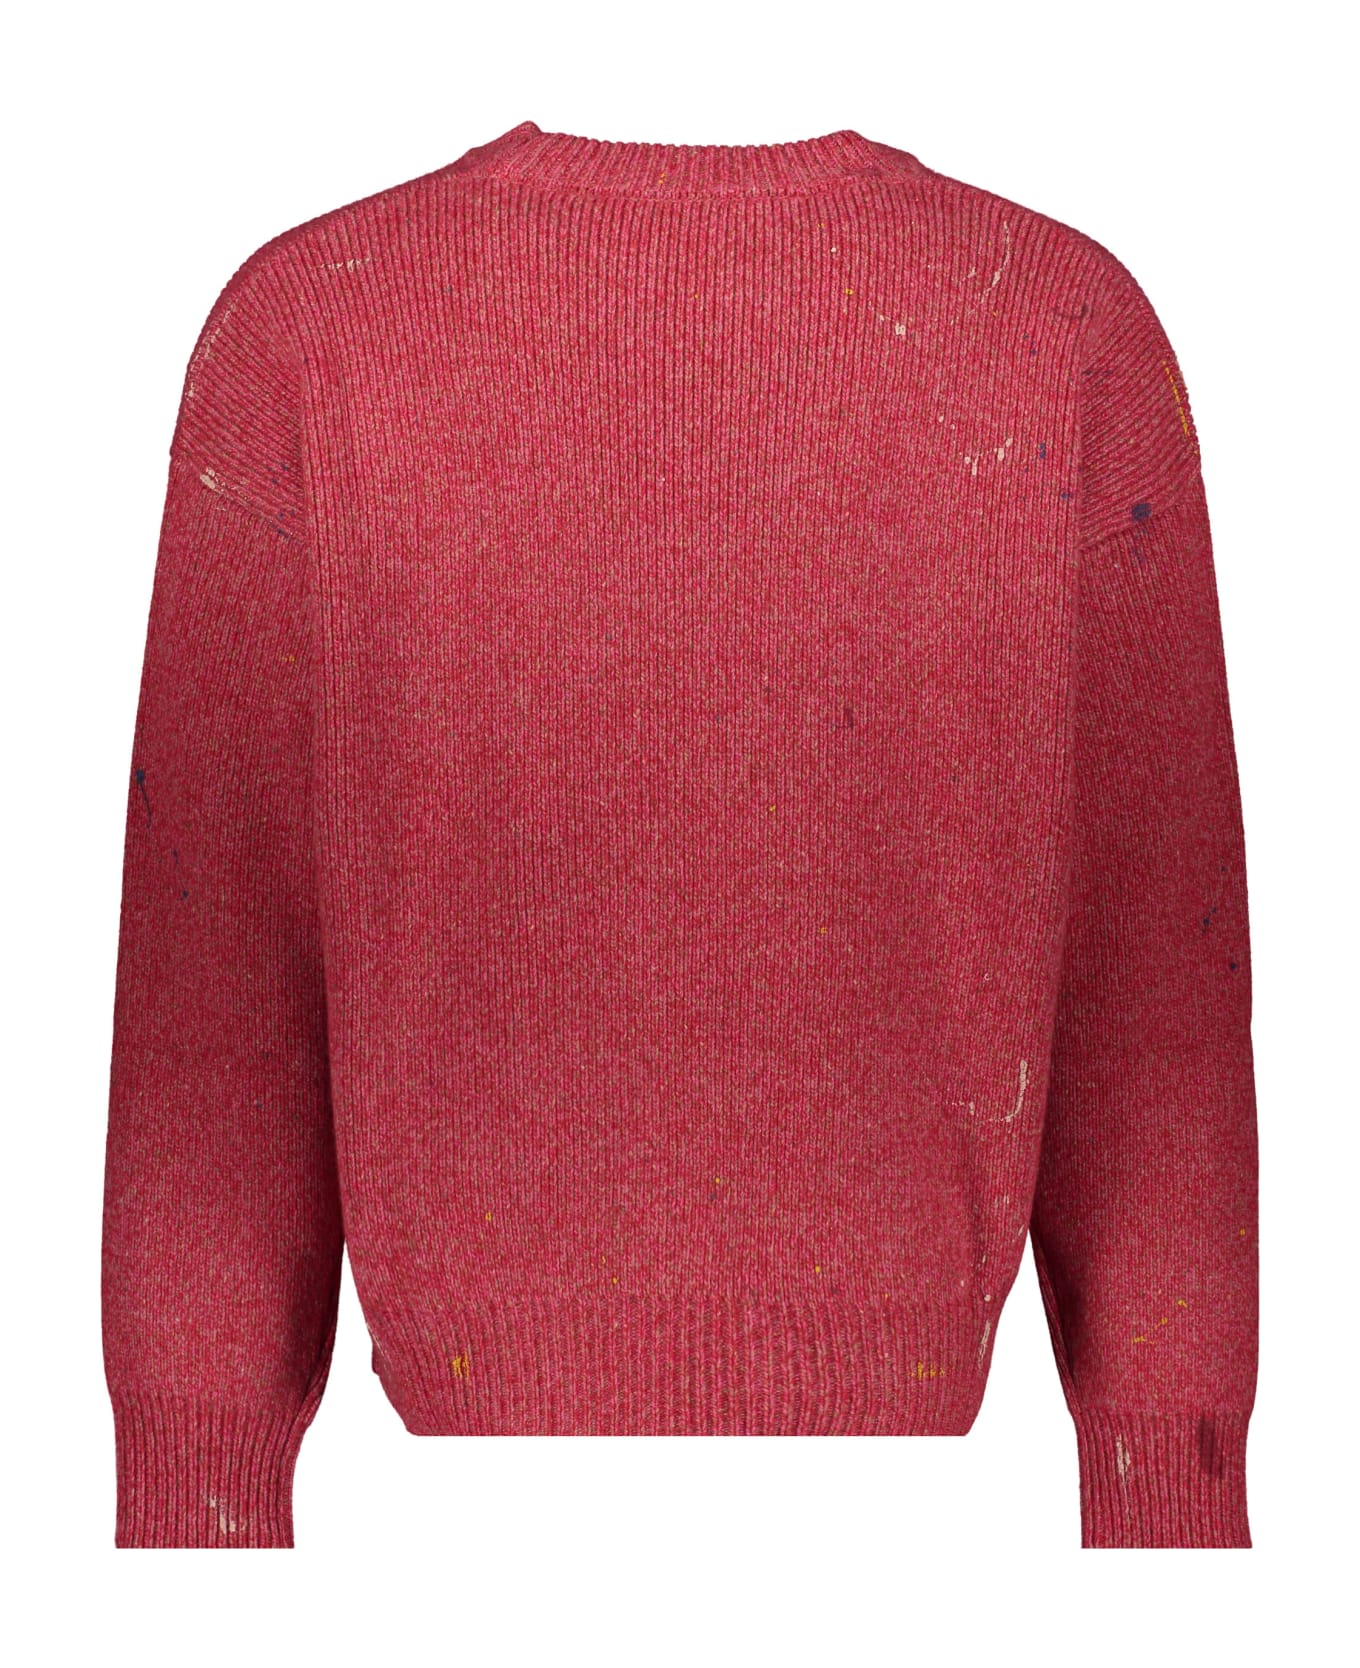 Palm Angels Long Sleeve Crew-neck Sweater - red